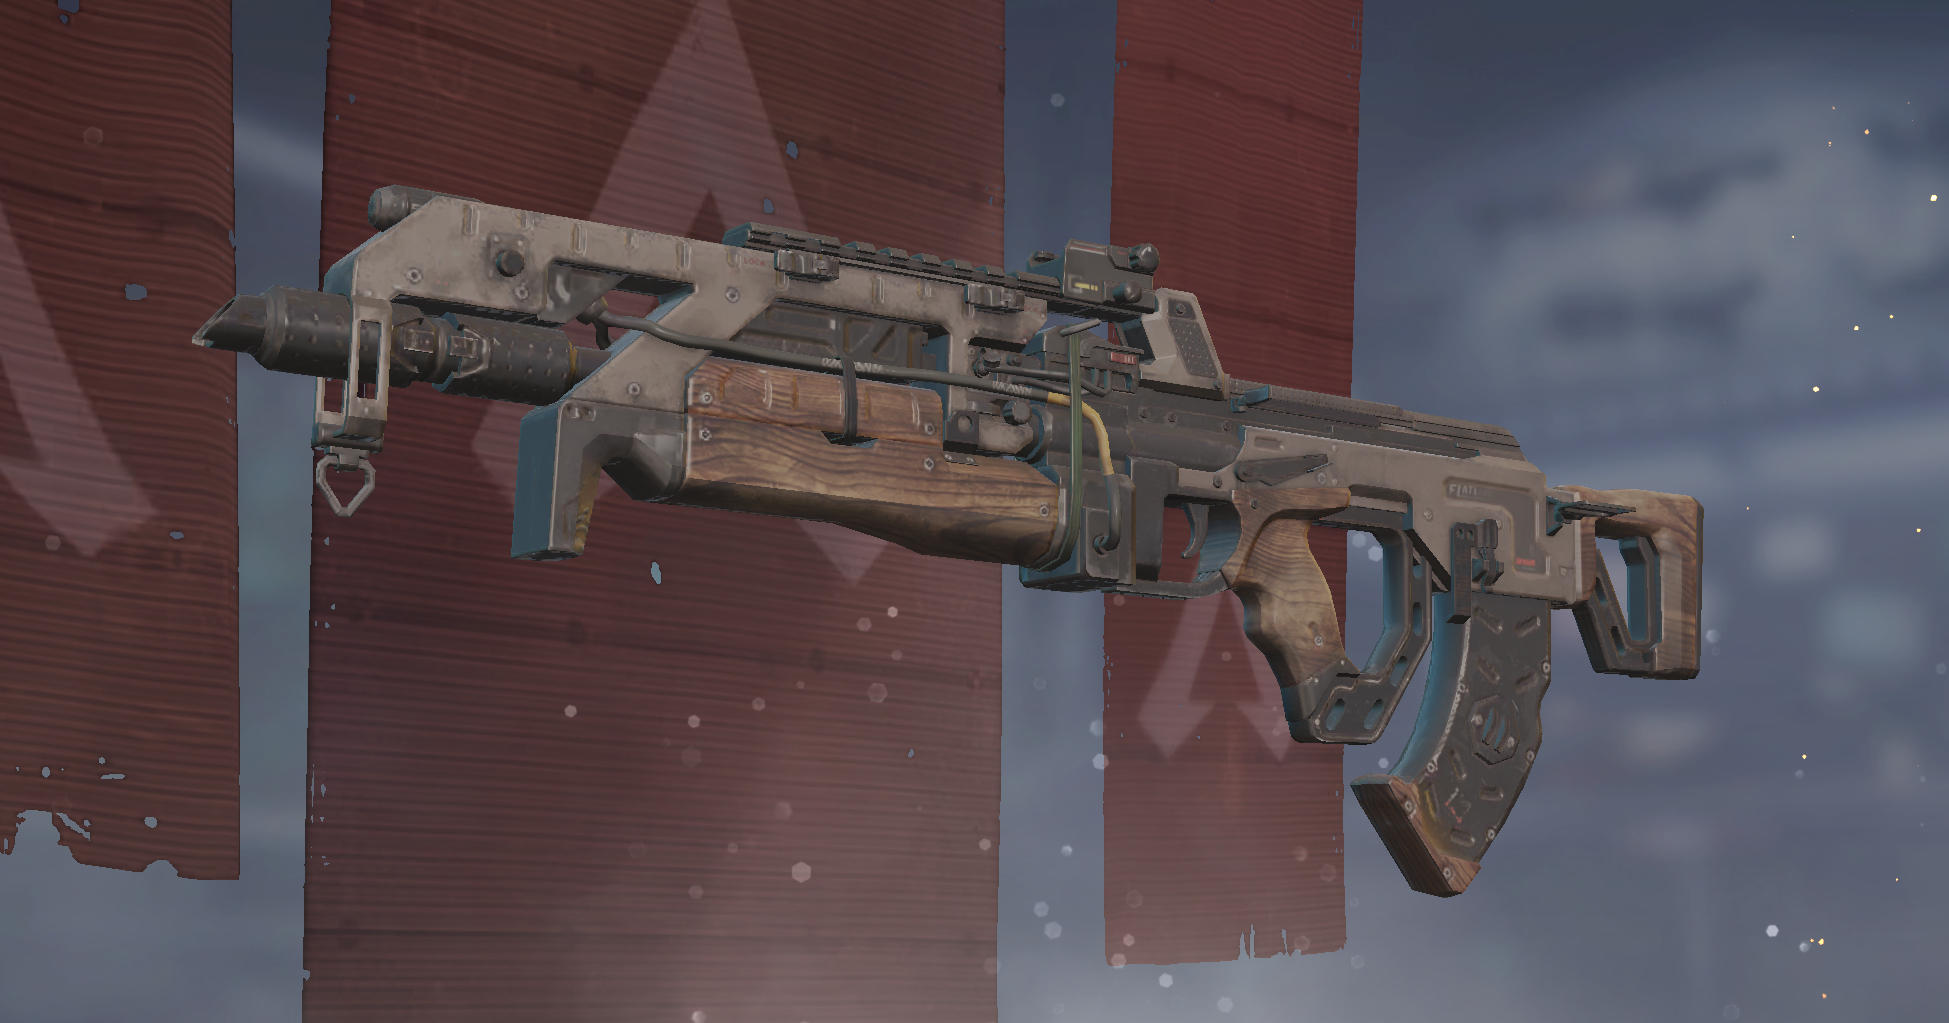 The Flatline heavy AR from Apex Legends.